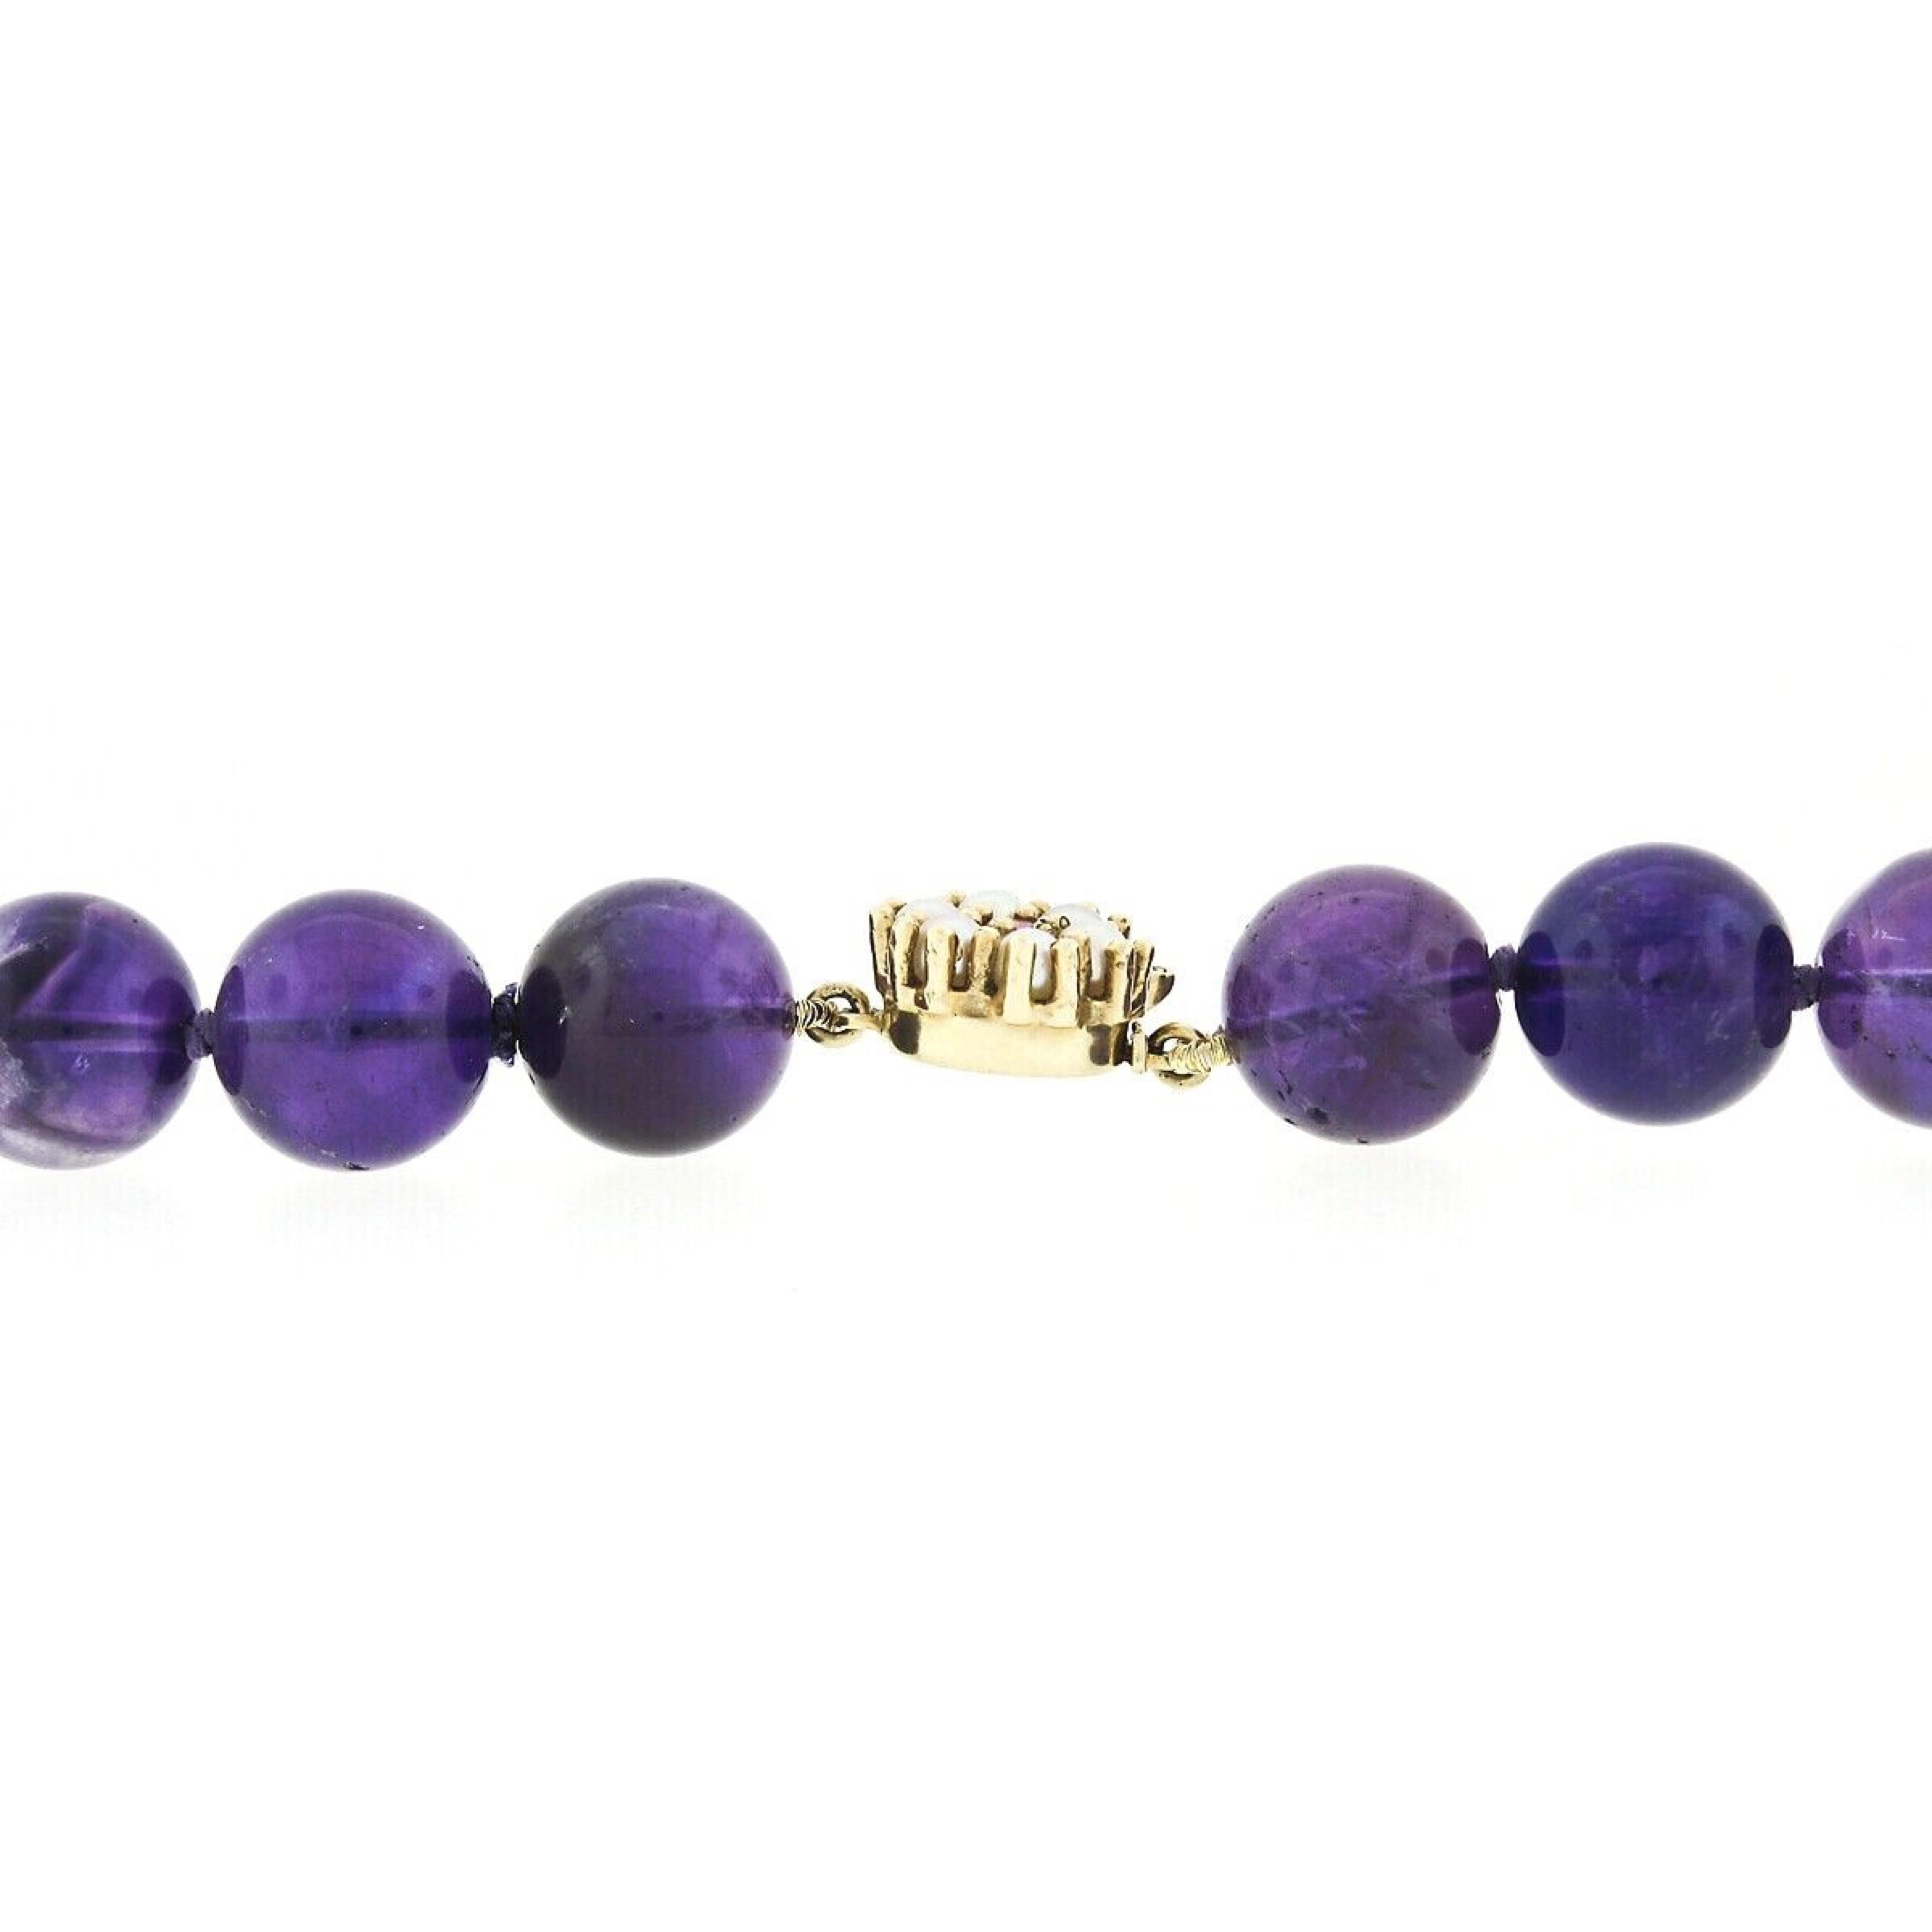 Women's or Men's 505ctw Round Bead Amethyst Strand Necklace W/ 14k Gold Pearl Ruby Clasp